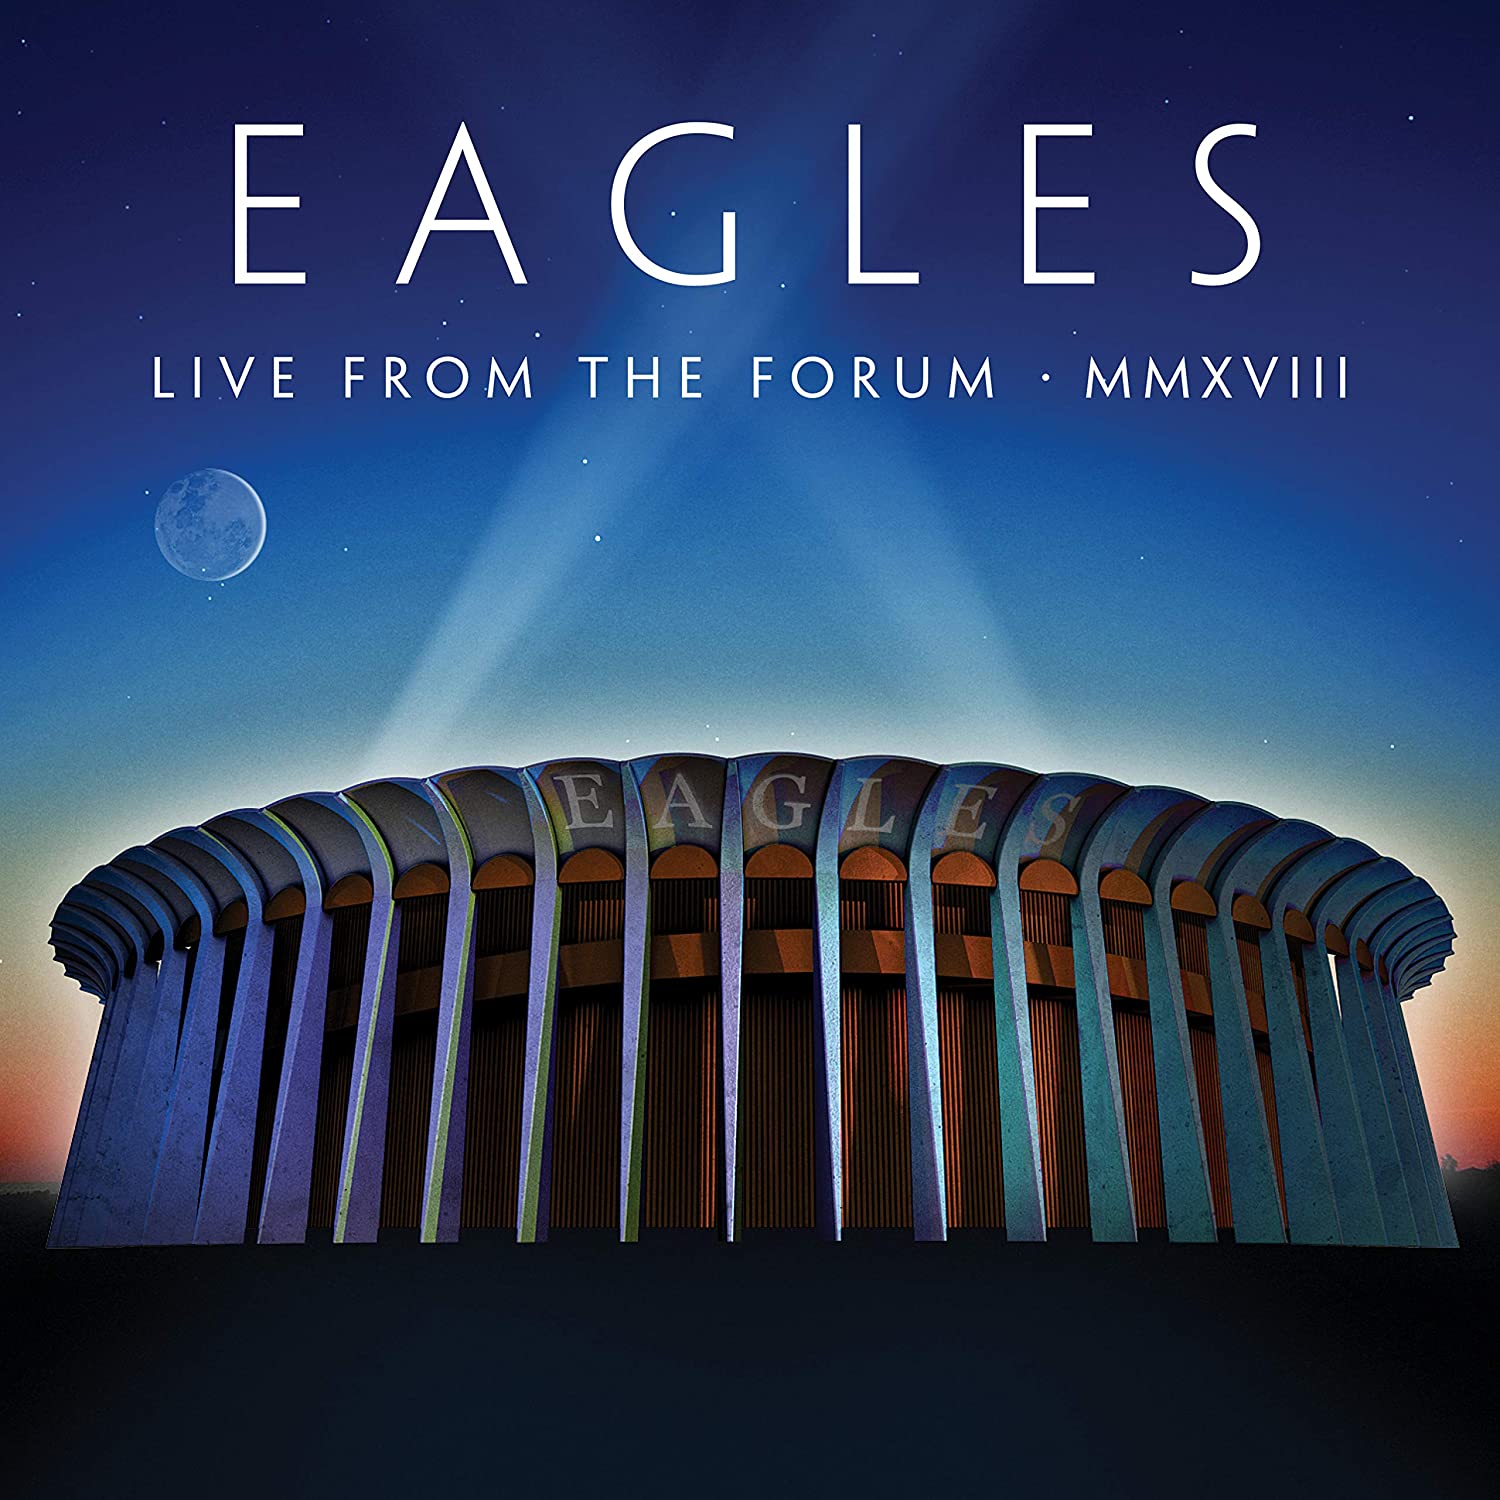 Eagles - Live from the Forum MMXVIII (Ltd Box) [4LP] Import